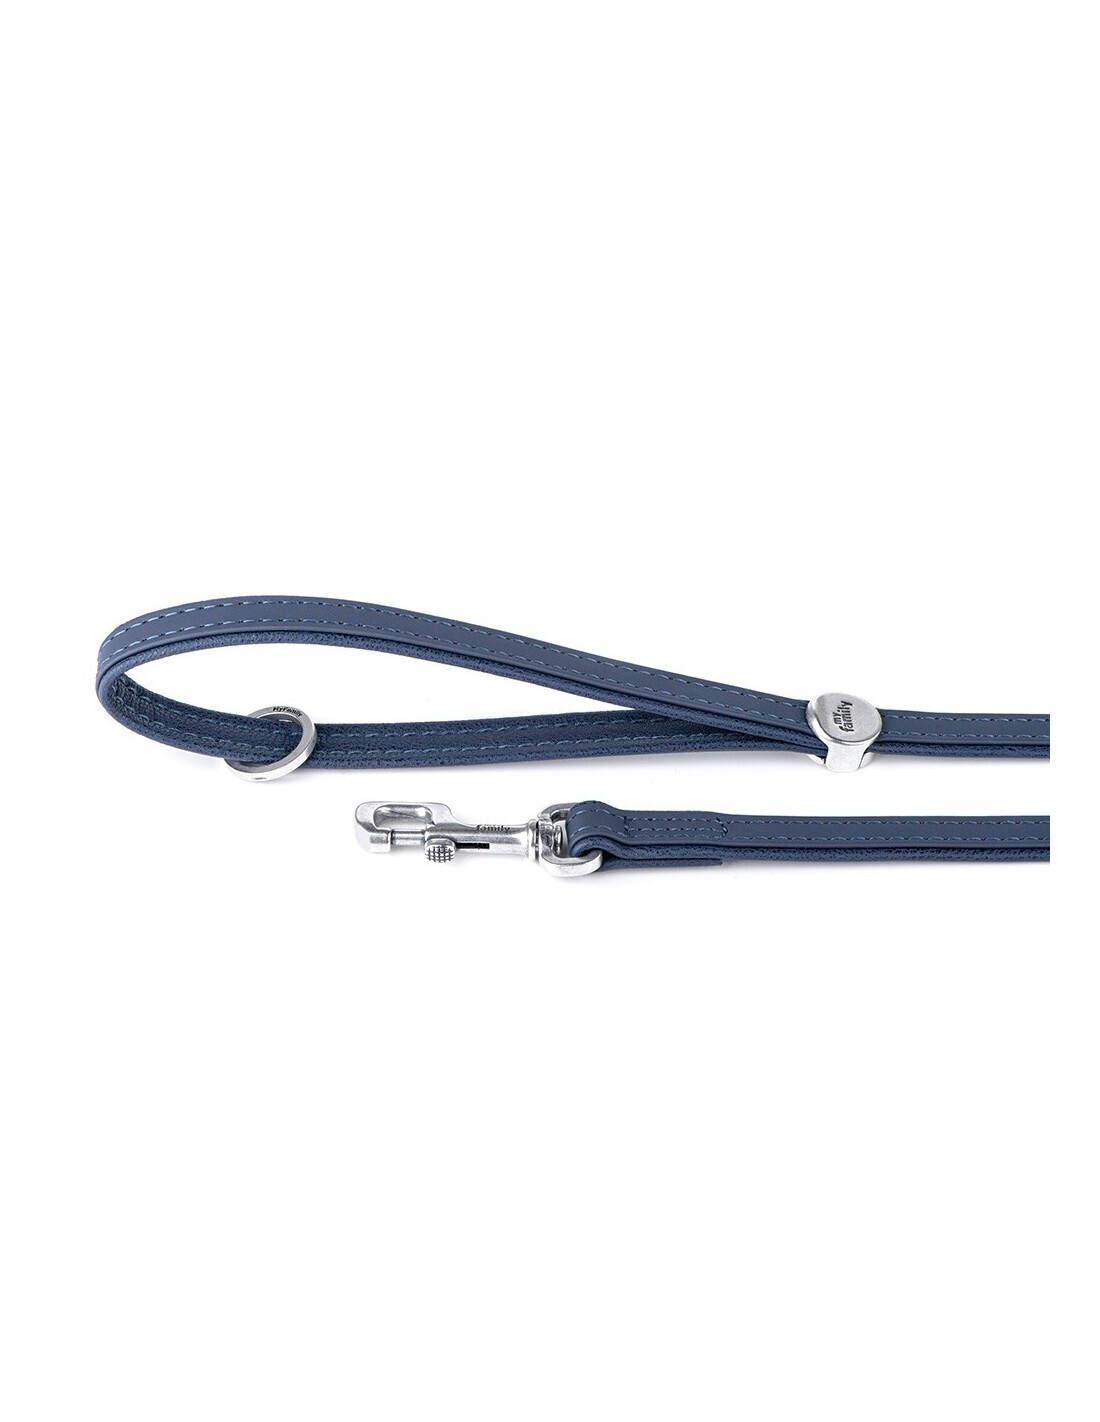 MyFamily Bilbao Dog Leash in Fine Crafted Blue Leatherette